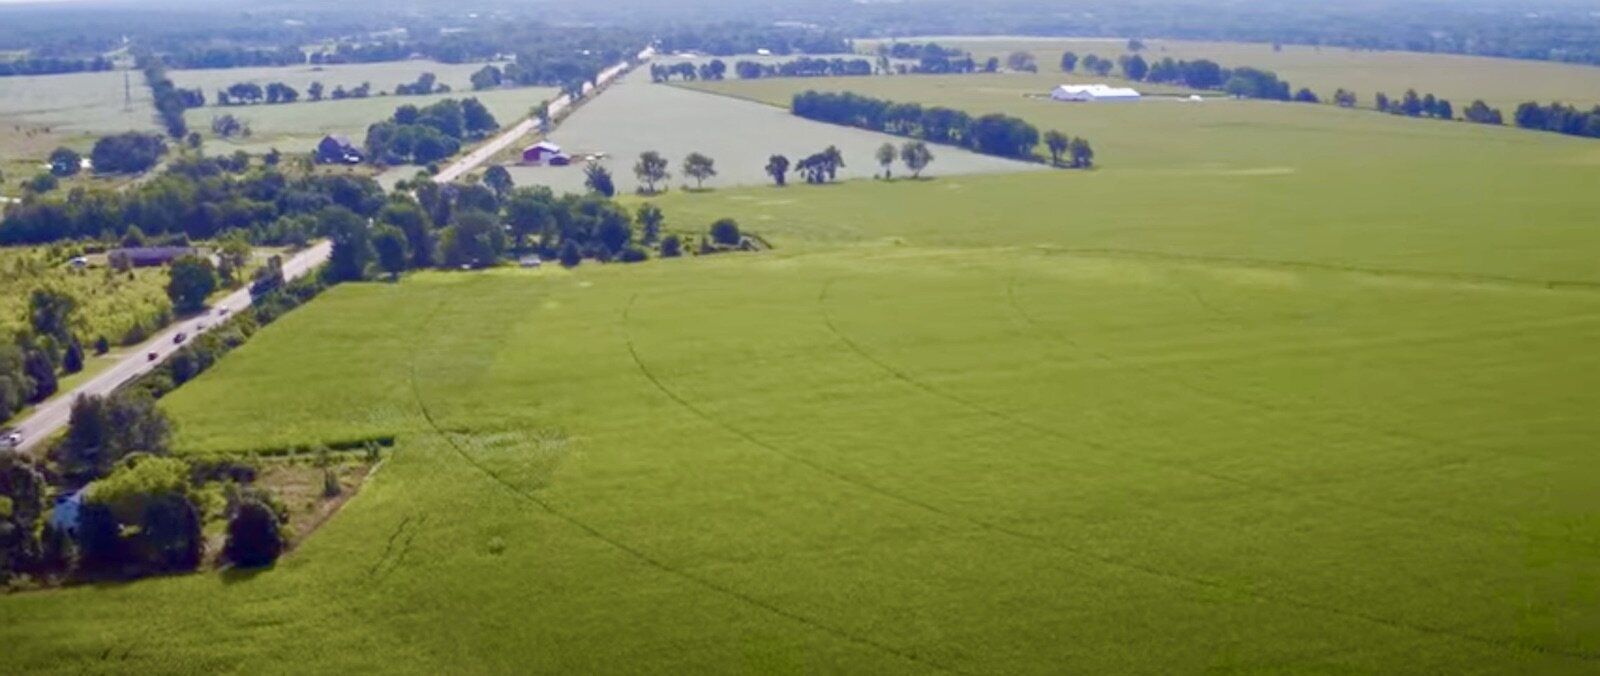 The Marshall Mega Site, located between I-69 and I-94, is in the process of being developed by several governmental entitties, including Calhoun County.